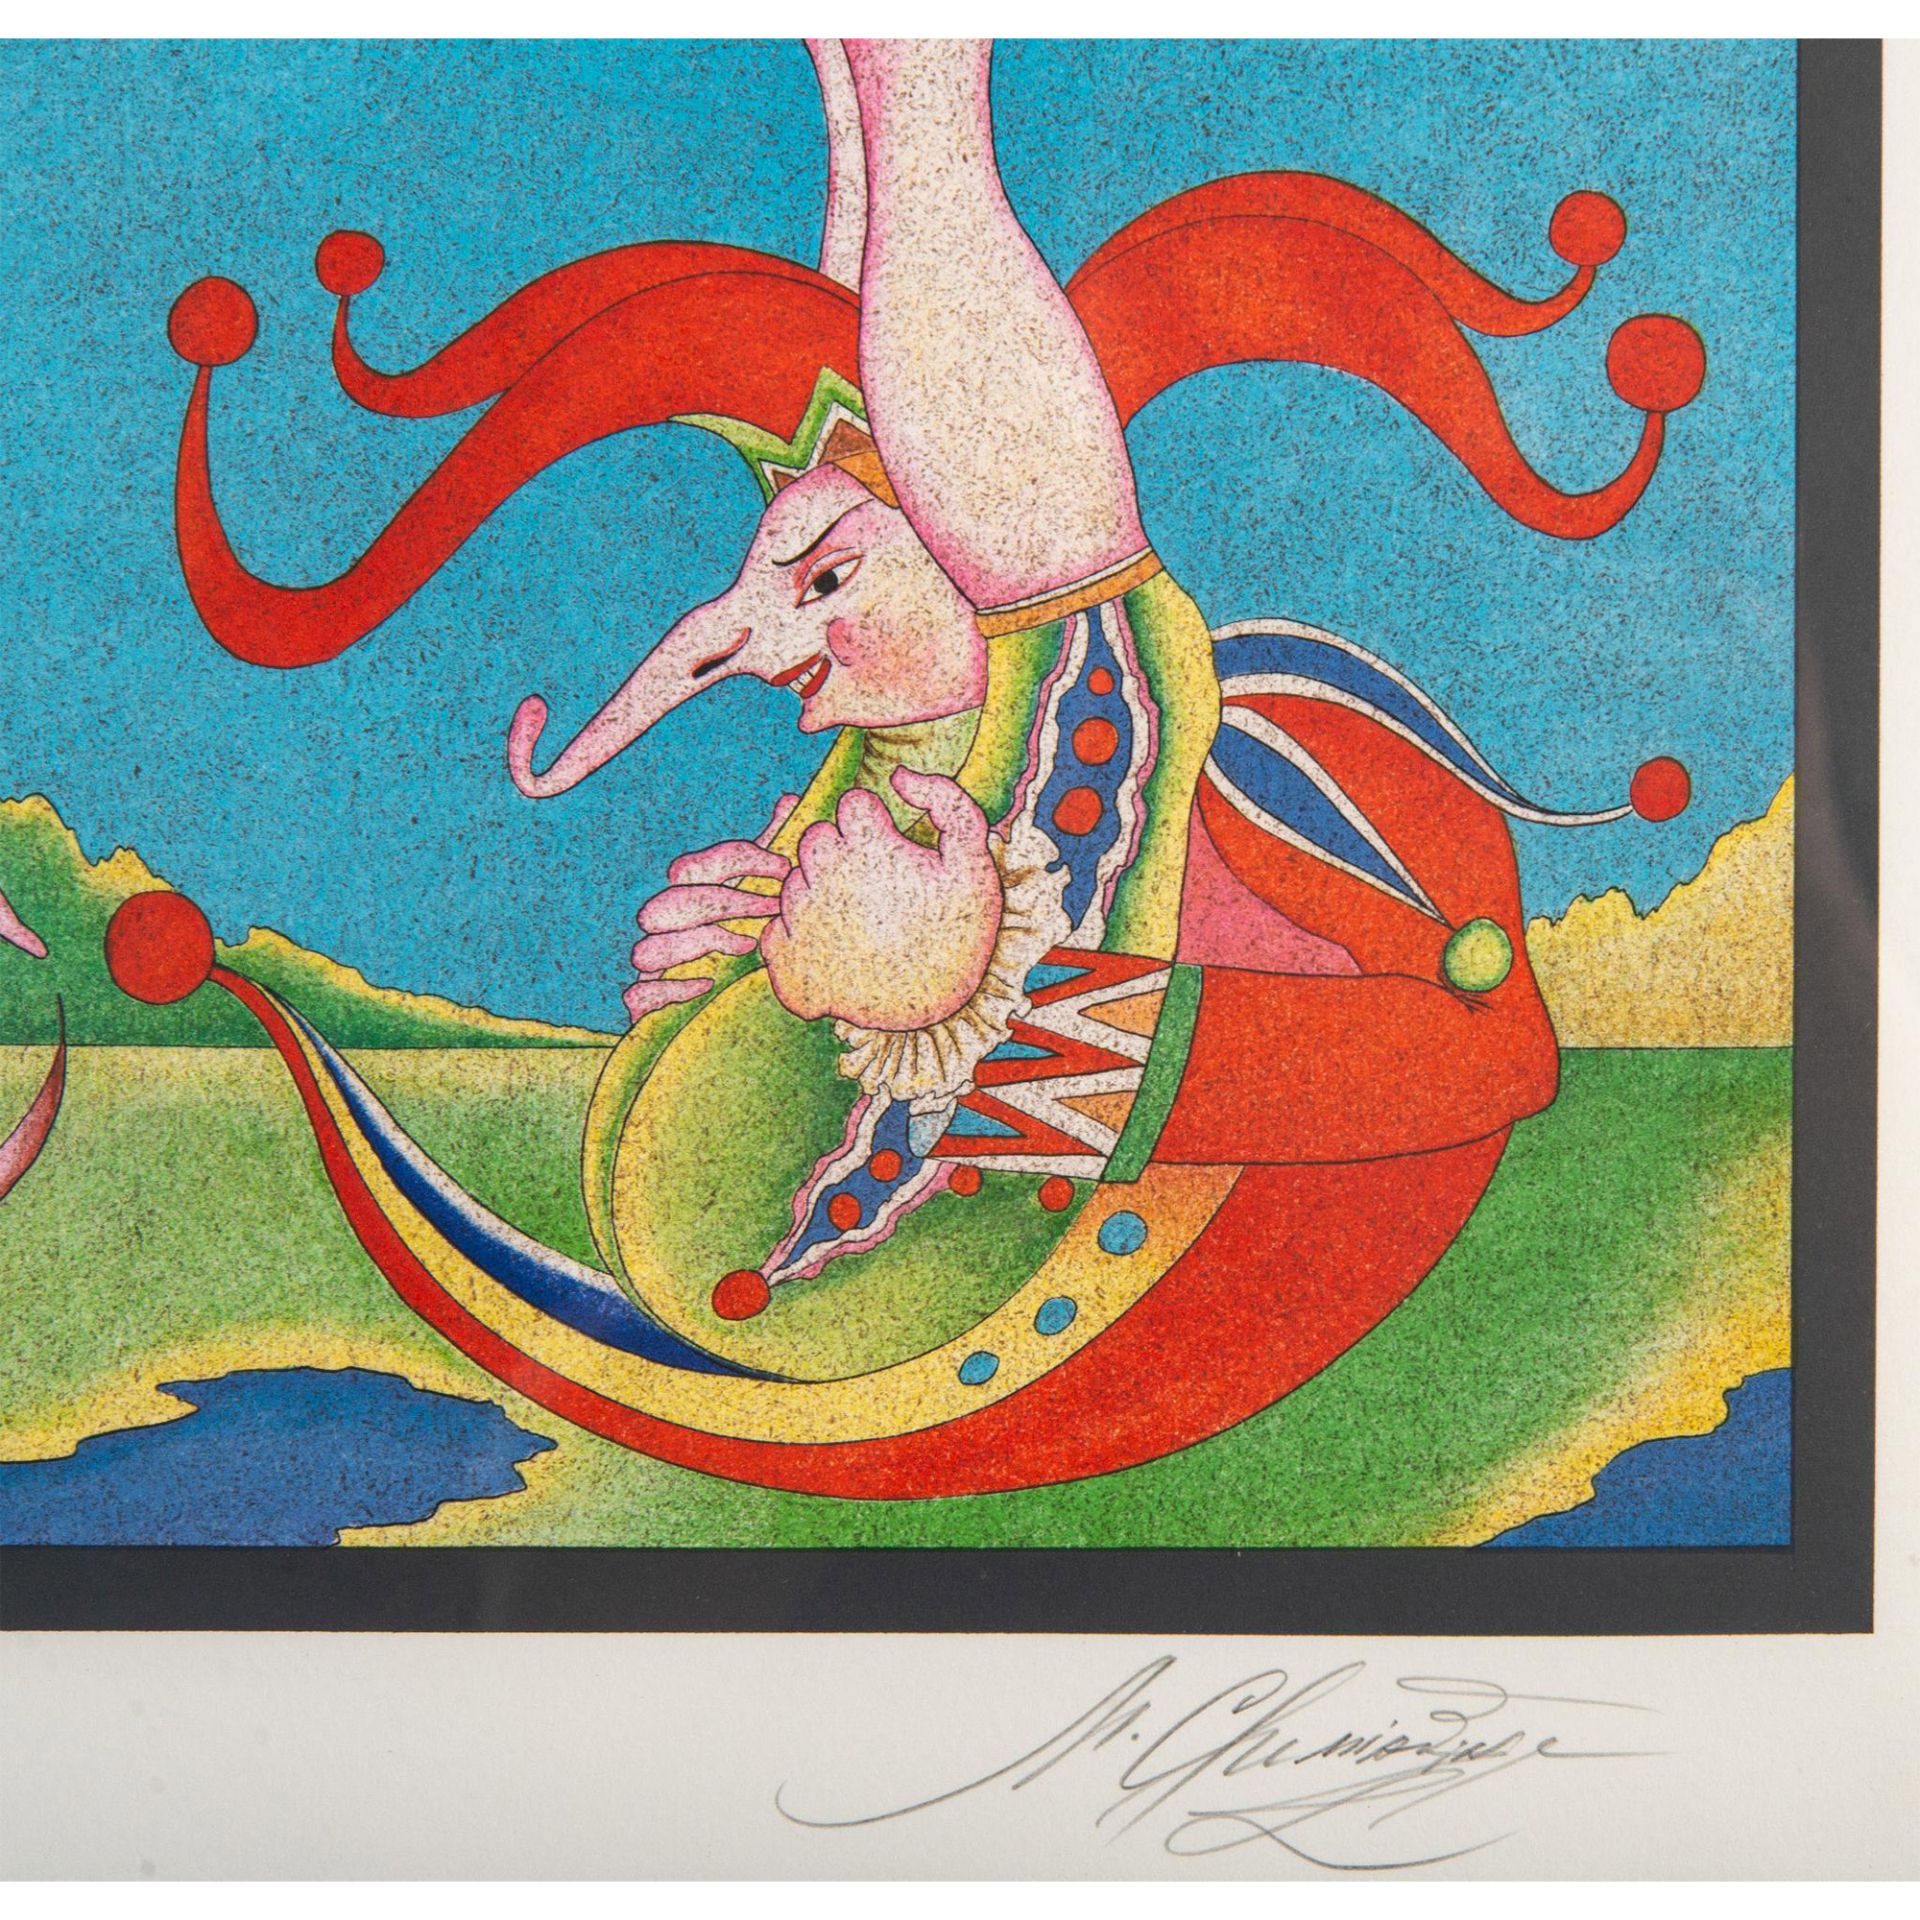 Mihail Chemiakin (Russian/French, b.1943) Color Lithograph on Velin Paper, Signed - Image 3 of 7